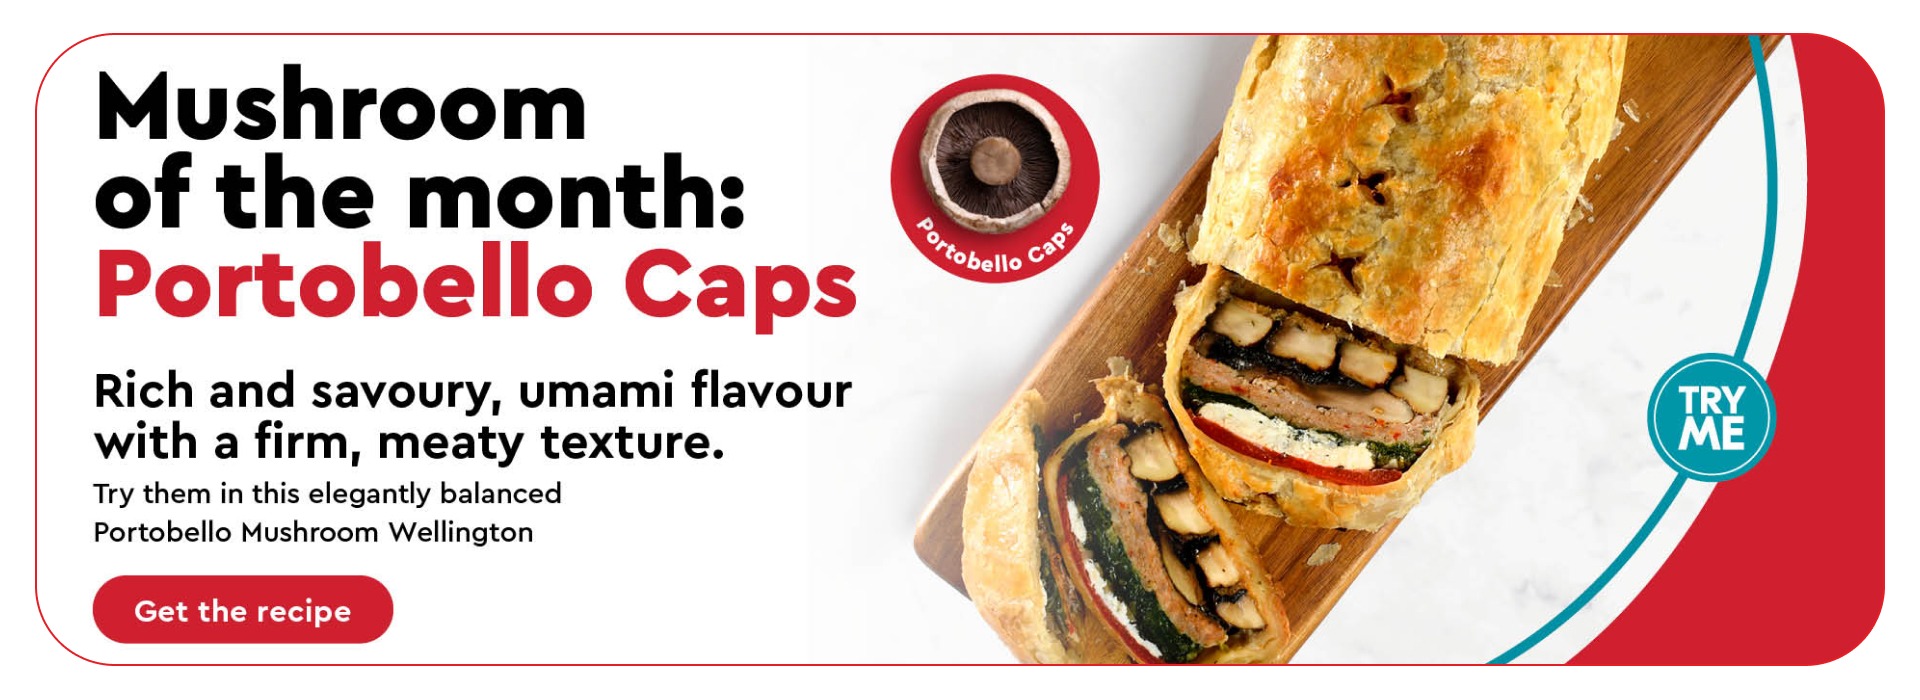 Mushroom of the month:Portobello Caps Rich and savoury, umami flavour with a firm, meaty texture. Try them in this elegantly balanced Portobello Mushroom Wellington